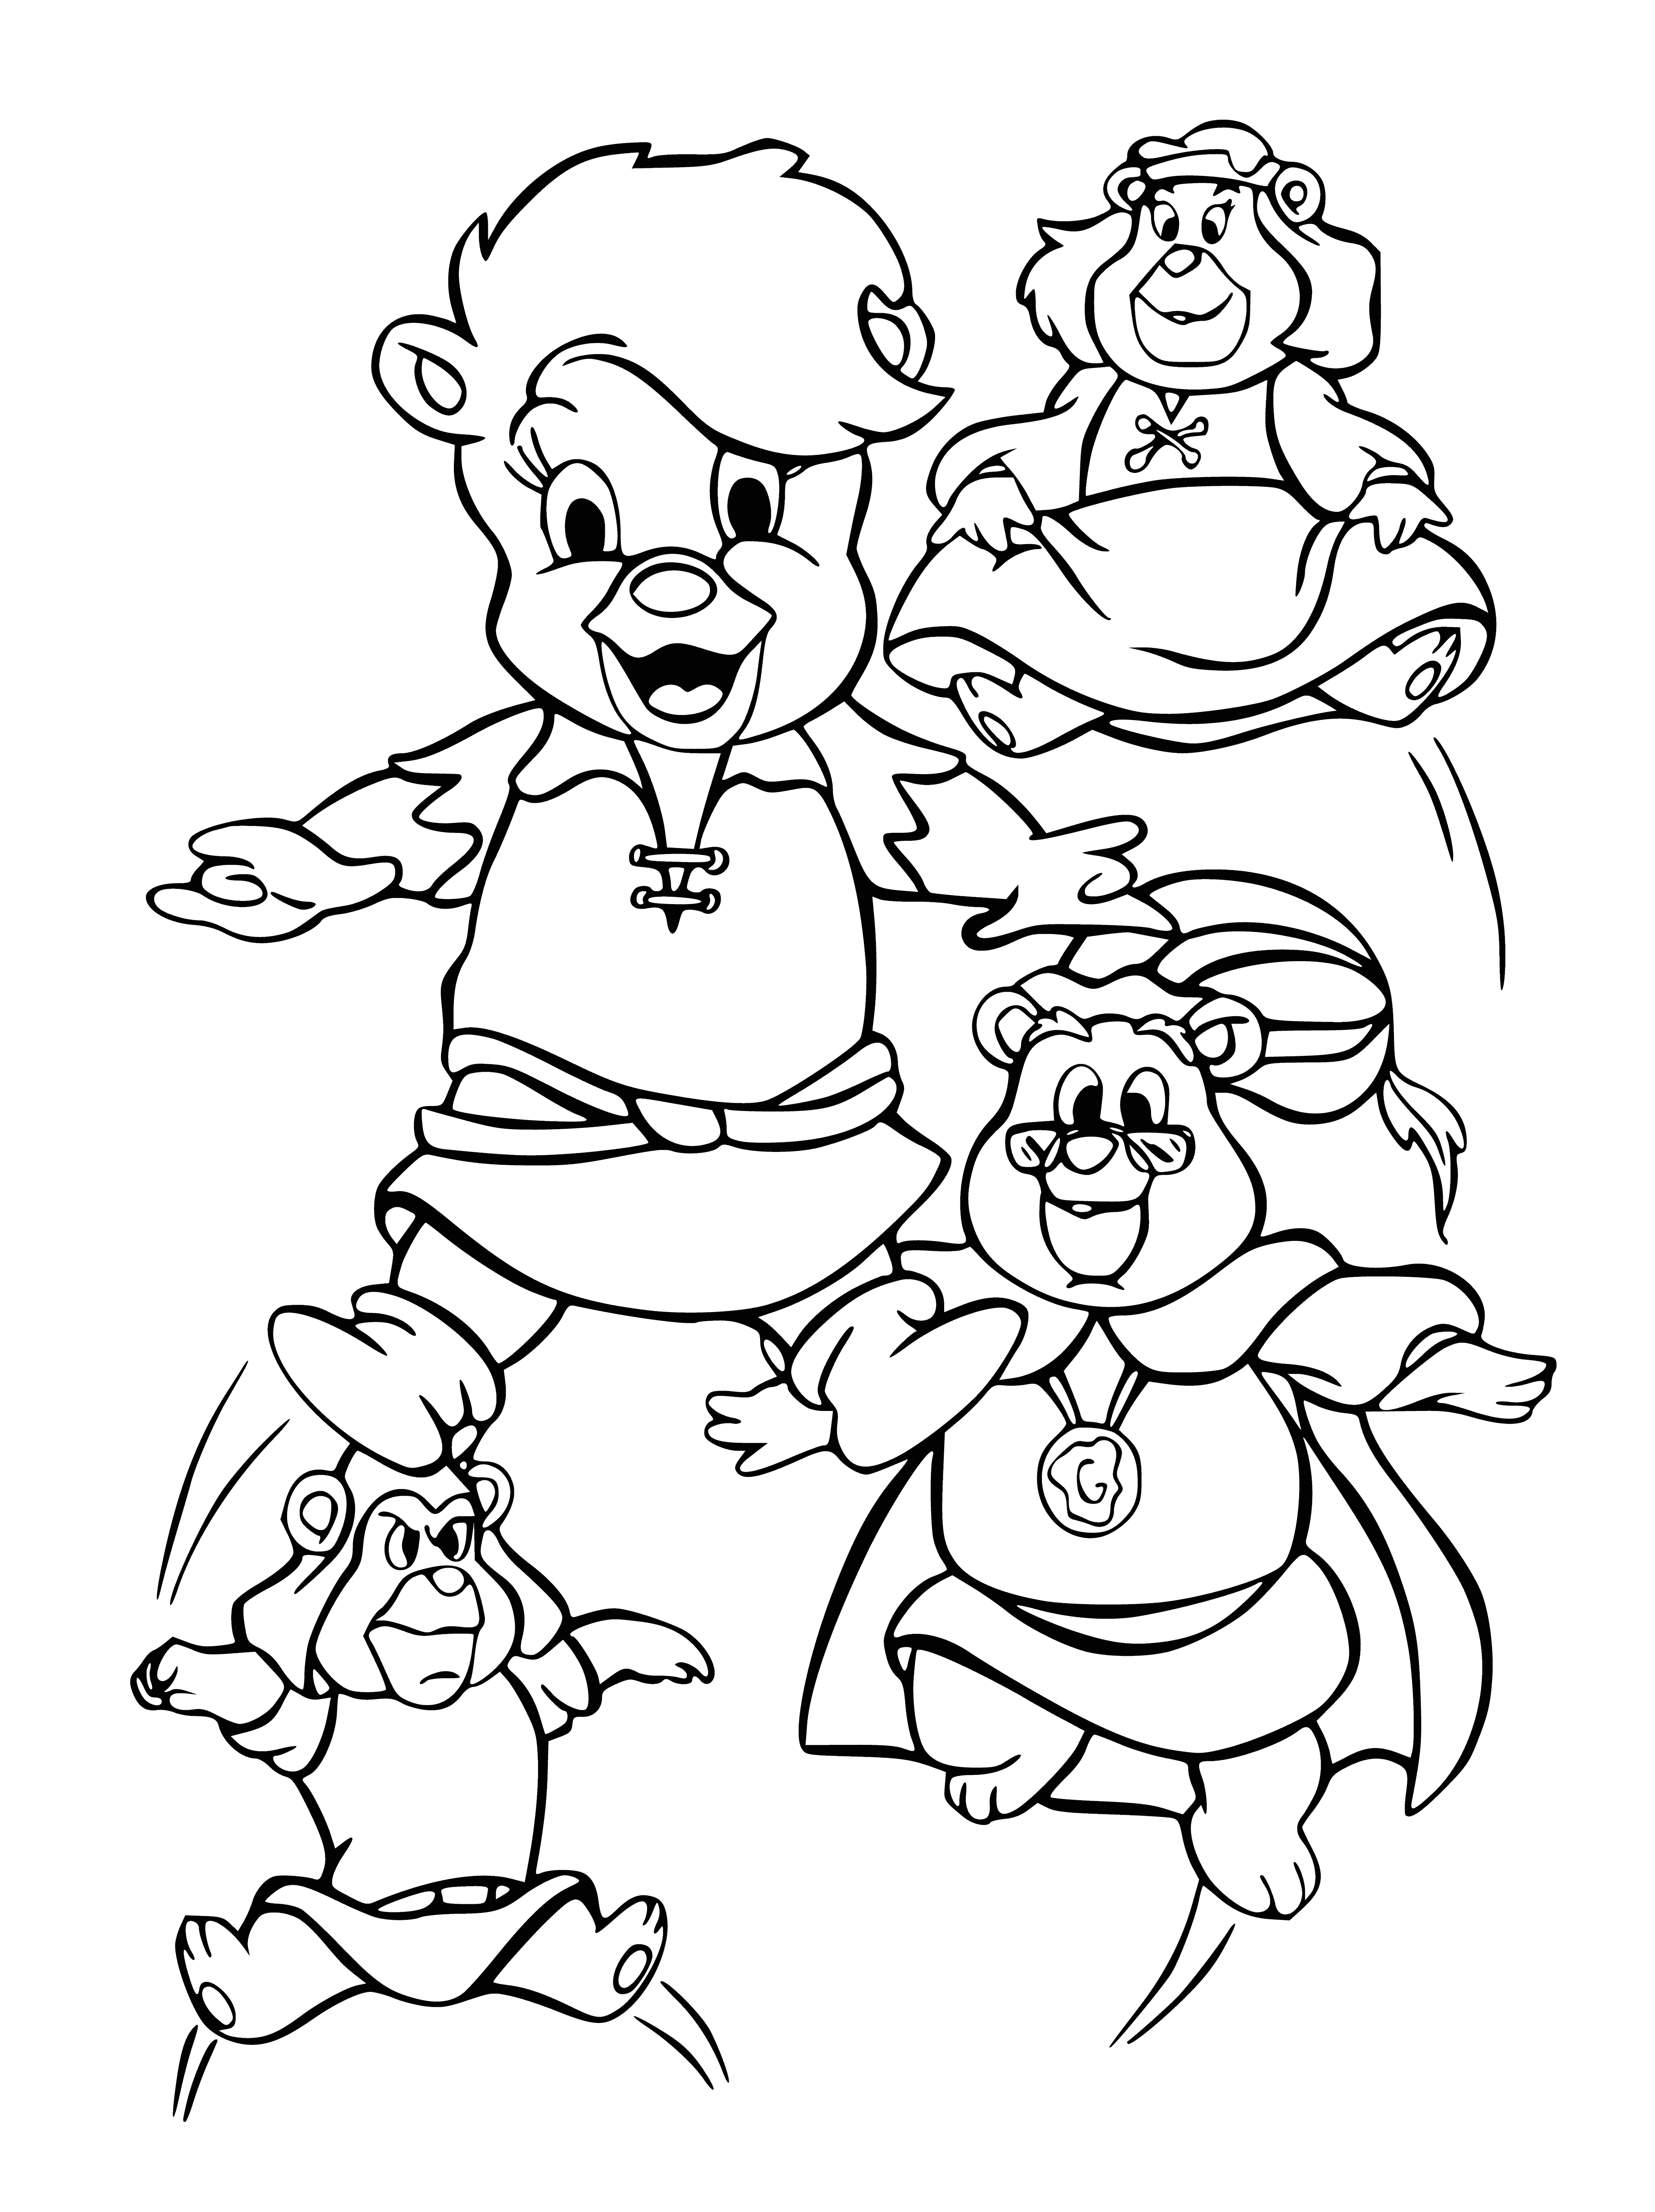 Jumping bears coloring page